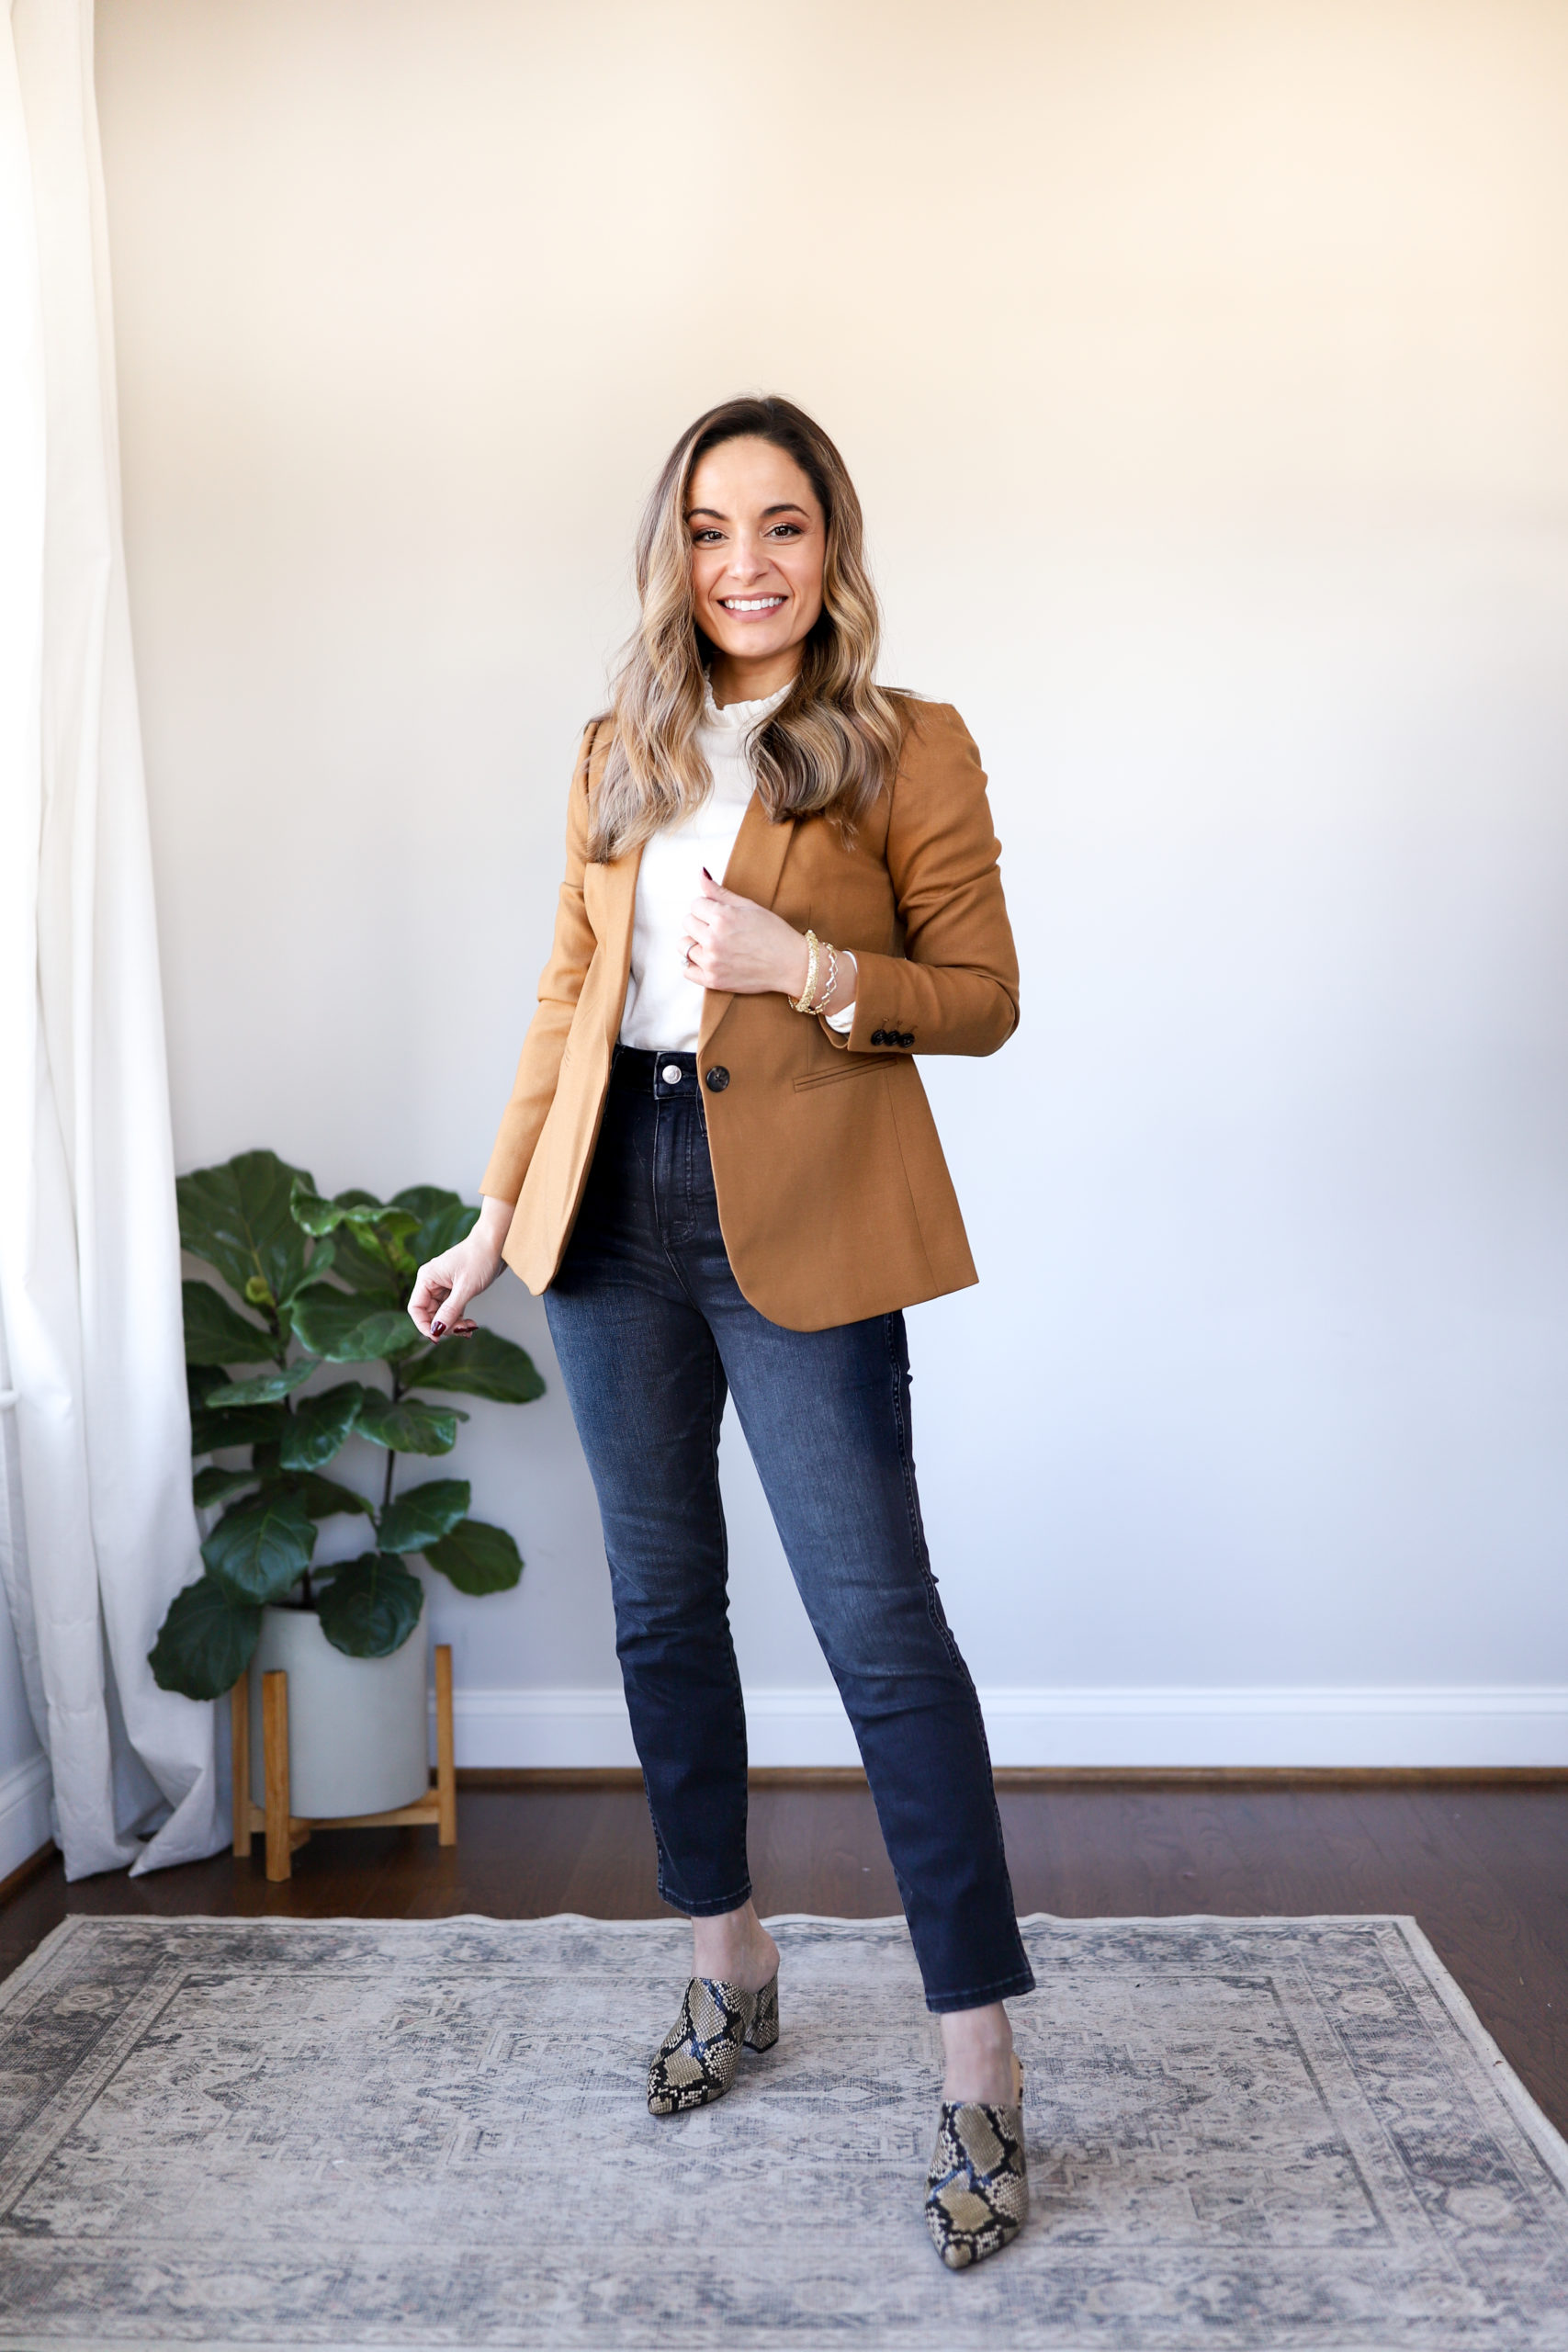 One Week of Casual Work Outfits - Pumps \u0026 Push Ups